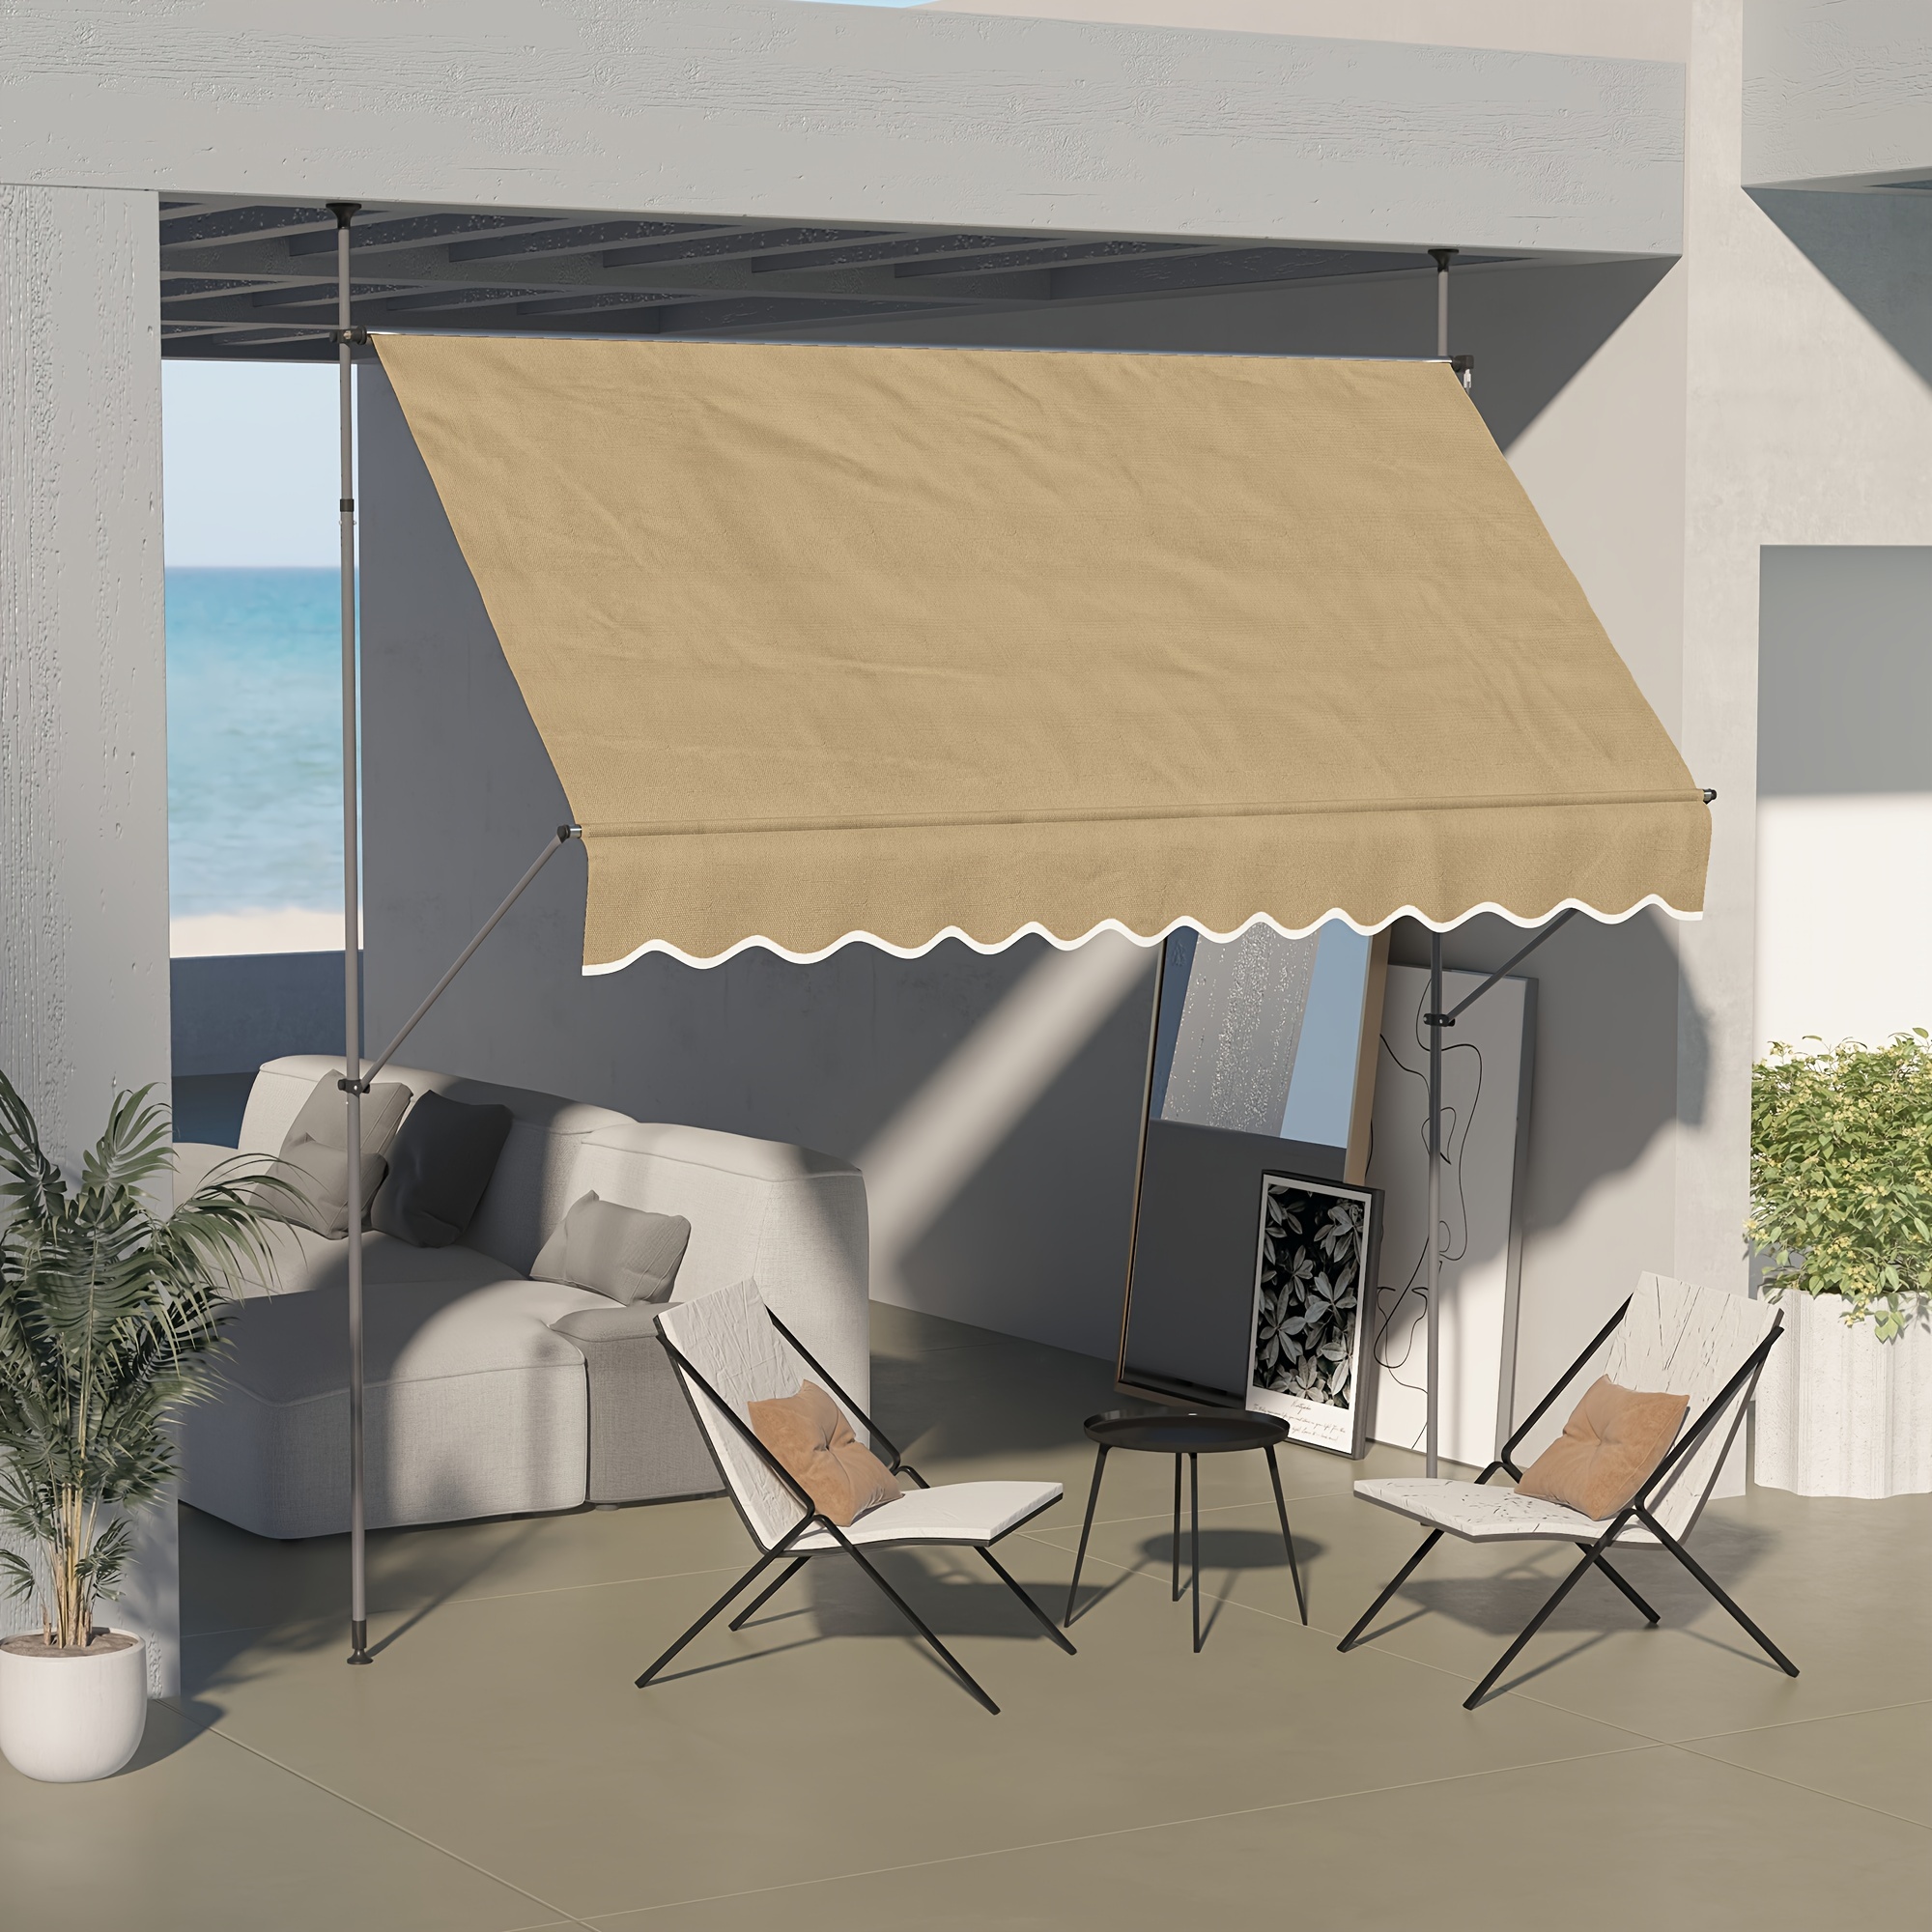 

Outsunny Manual Retractable Awning, 118" Non-screw Freestanding Patio Sun Shade Shelter With Support Pole Stand And Uv Resistant Fabric, For Window, Door, Porch, Deck, Beige